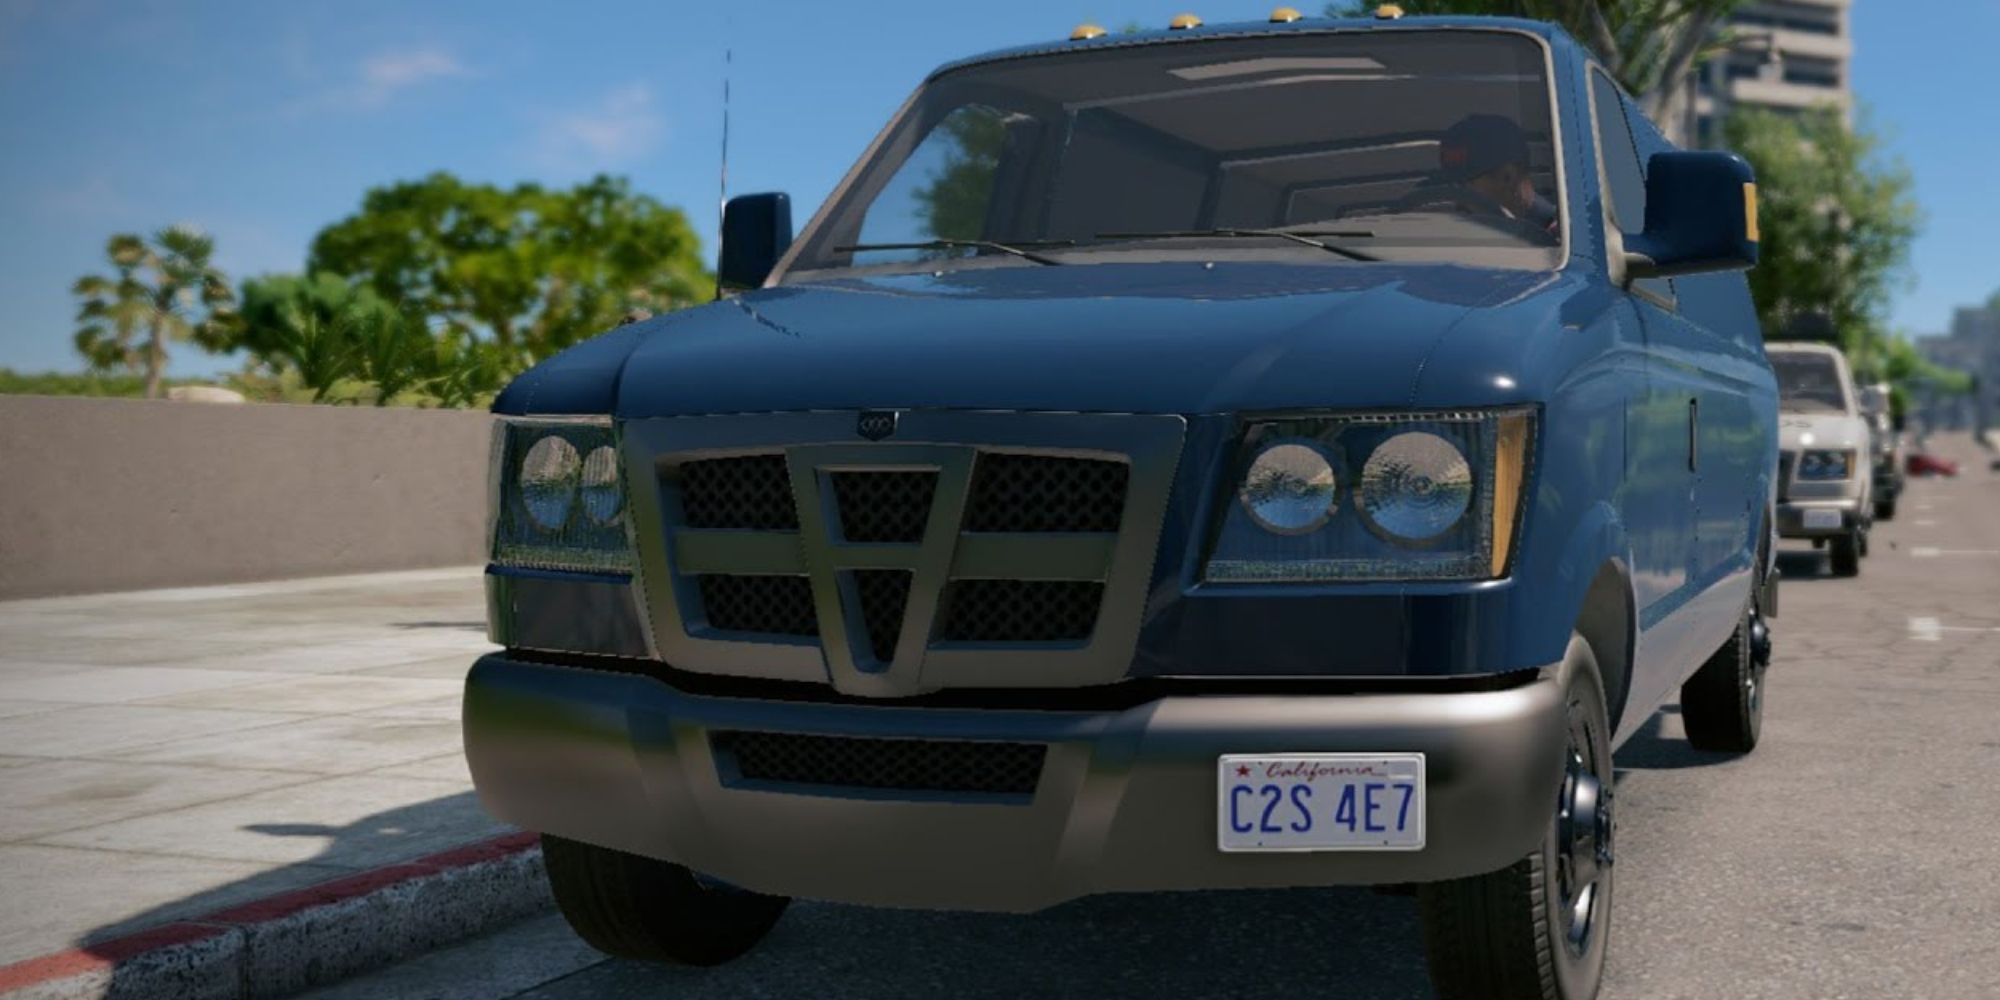 A close-up of a Landrock Van 2500 from Watch Dogs 2